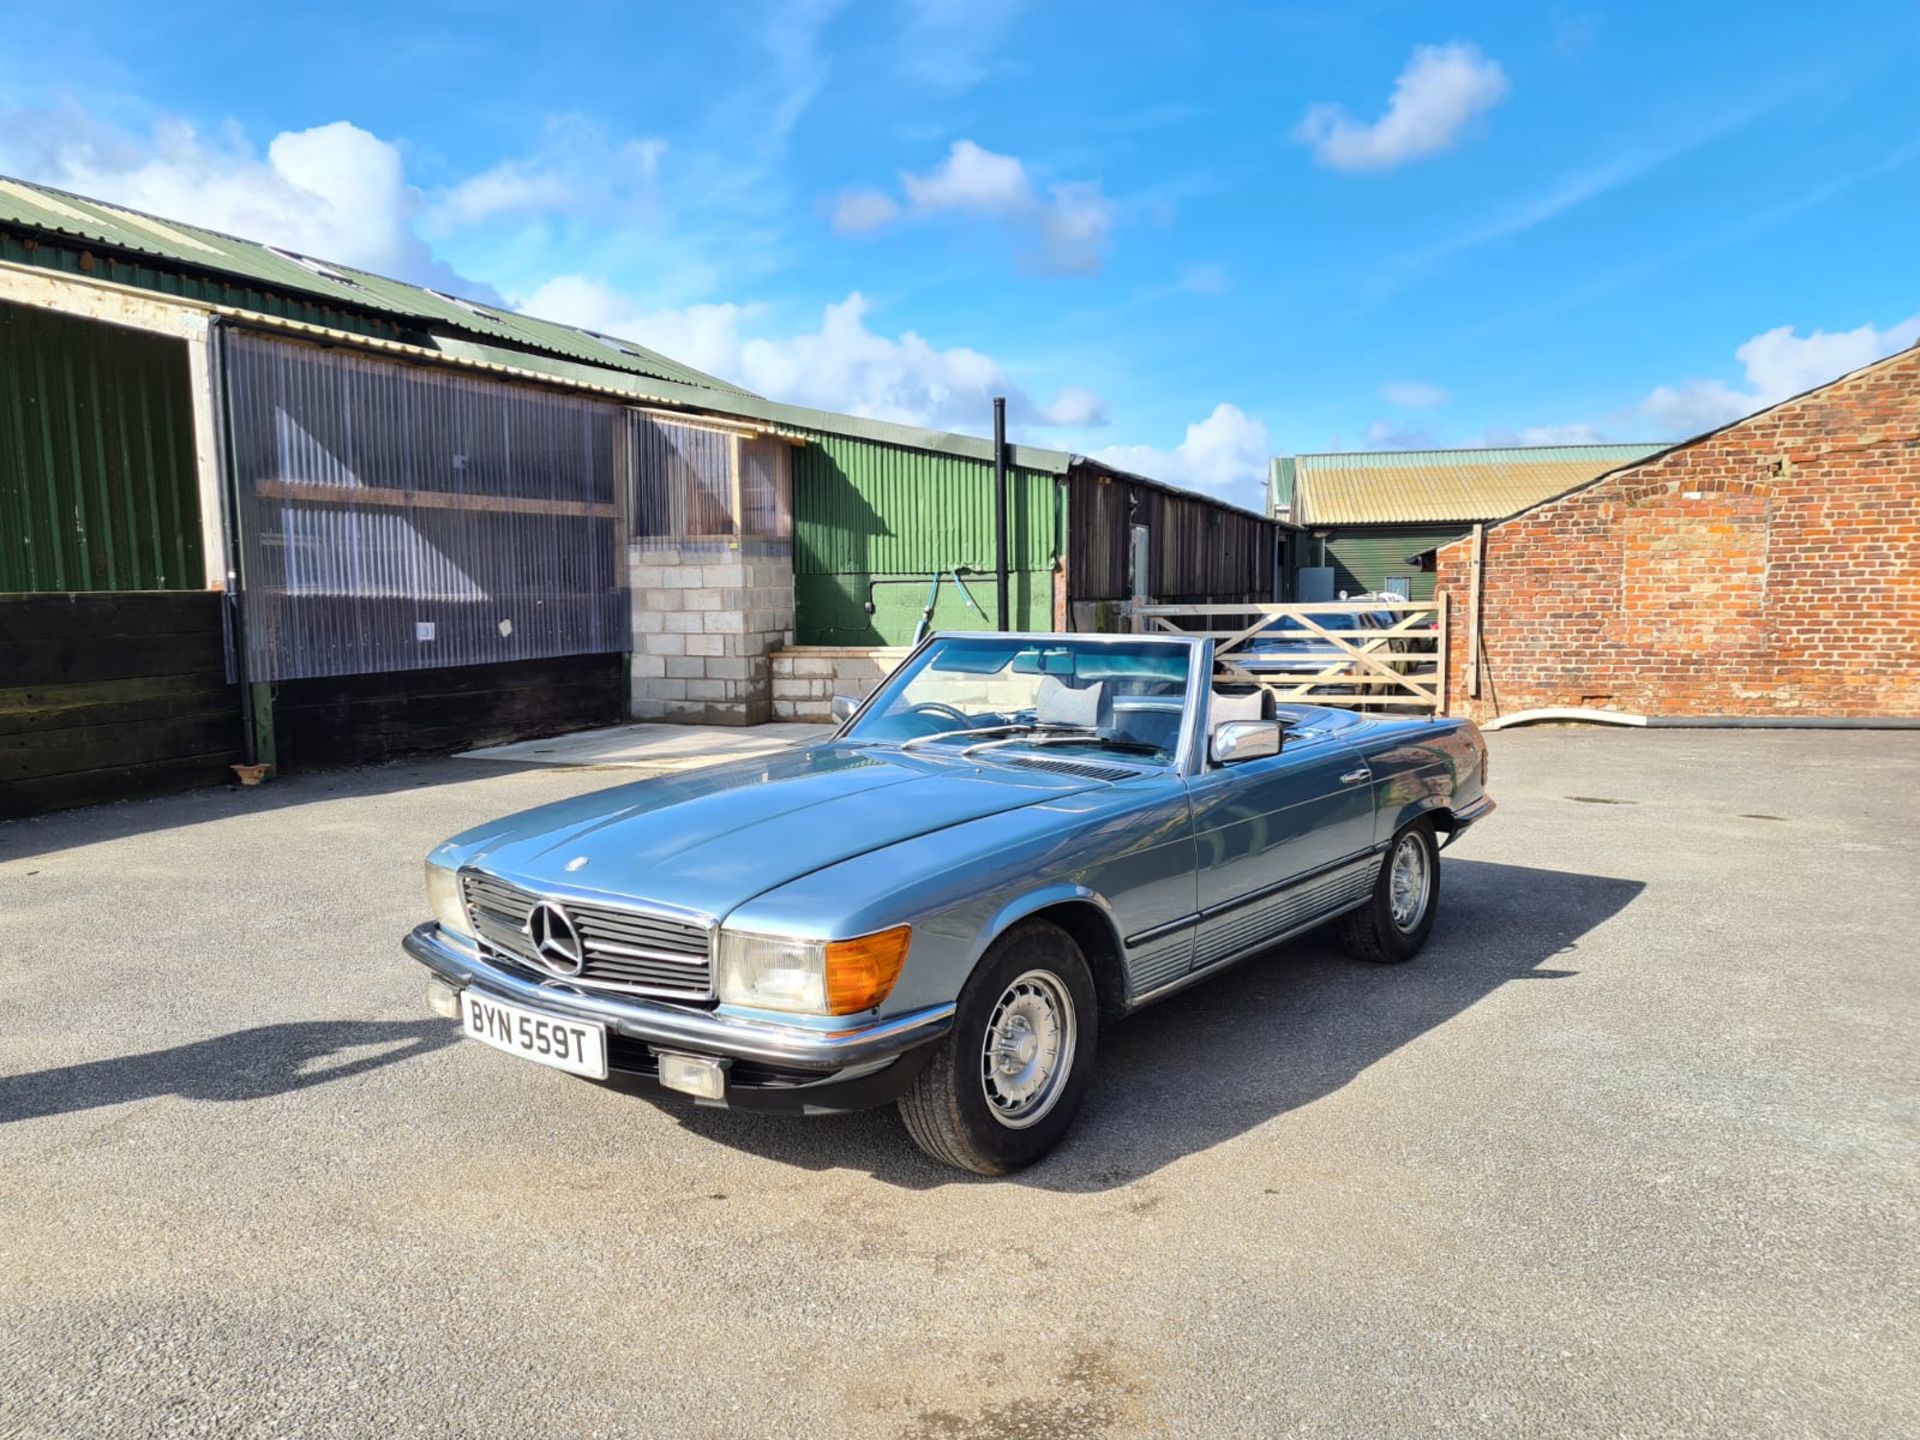 Stunning 1979 Mercedes Benz SL350 V8 With Factory Hardtop - Restored in 2018 - Image 15 of 22